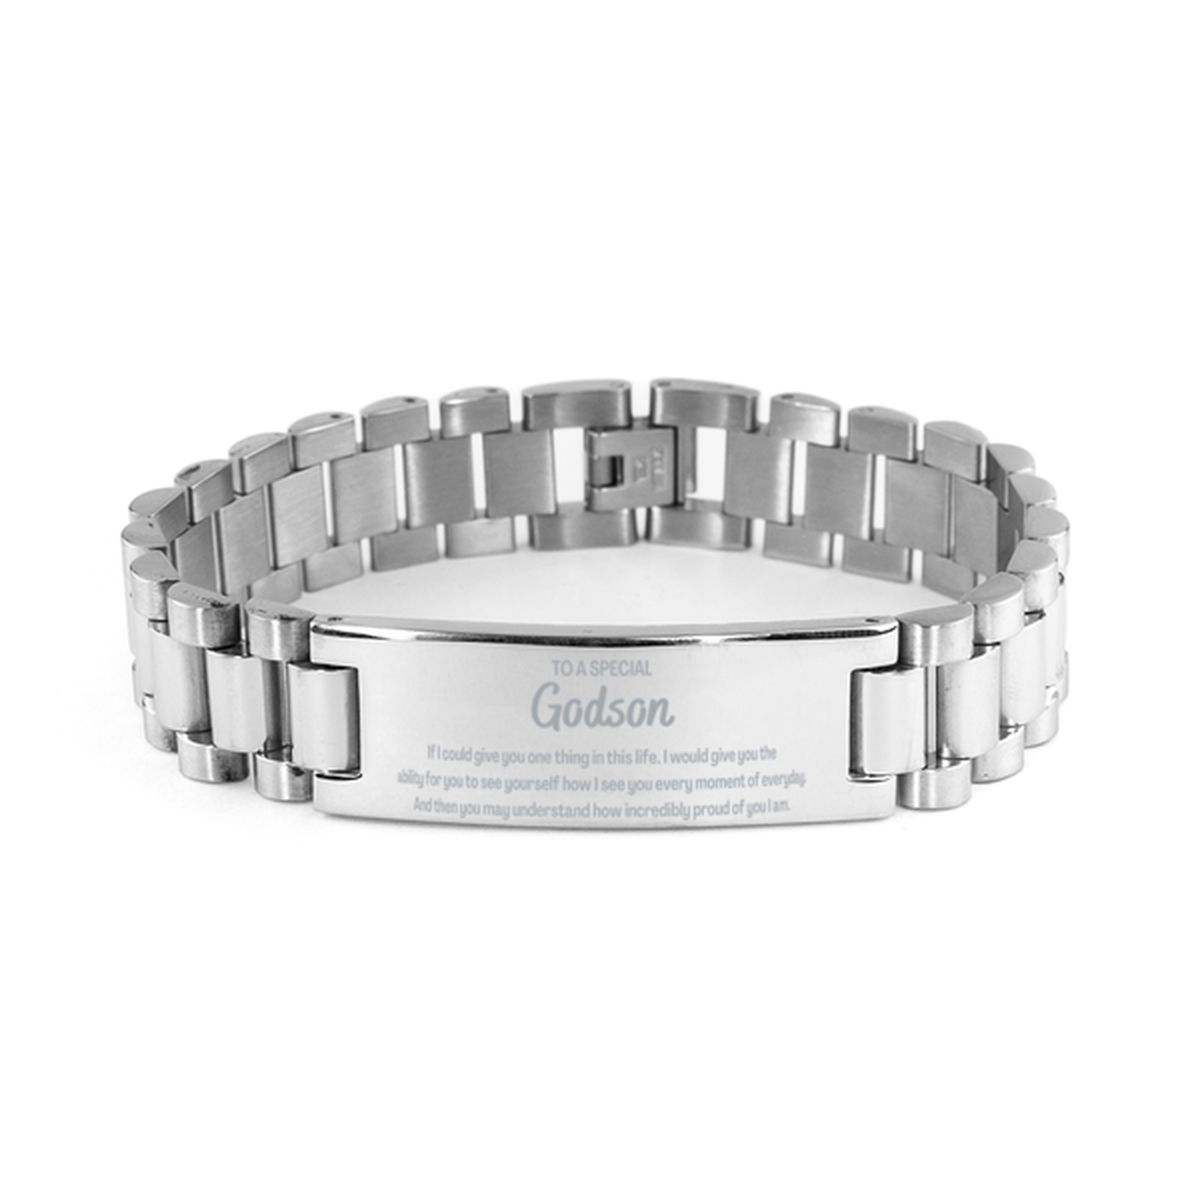 To My Godson Ladder Stainless Steel Bracelet, Gifts For Godson Engraved, Inspirational Gifts for Christmas Birthday, Epic Gifts for Godson To A Special Godson how incredibly proud of you I am